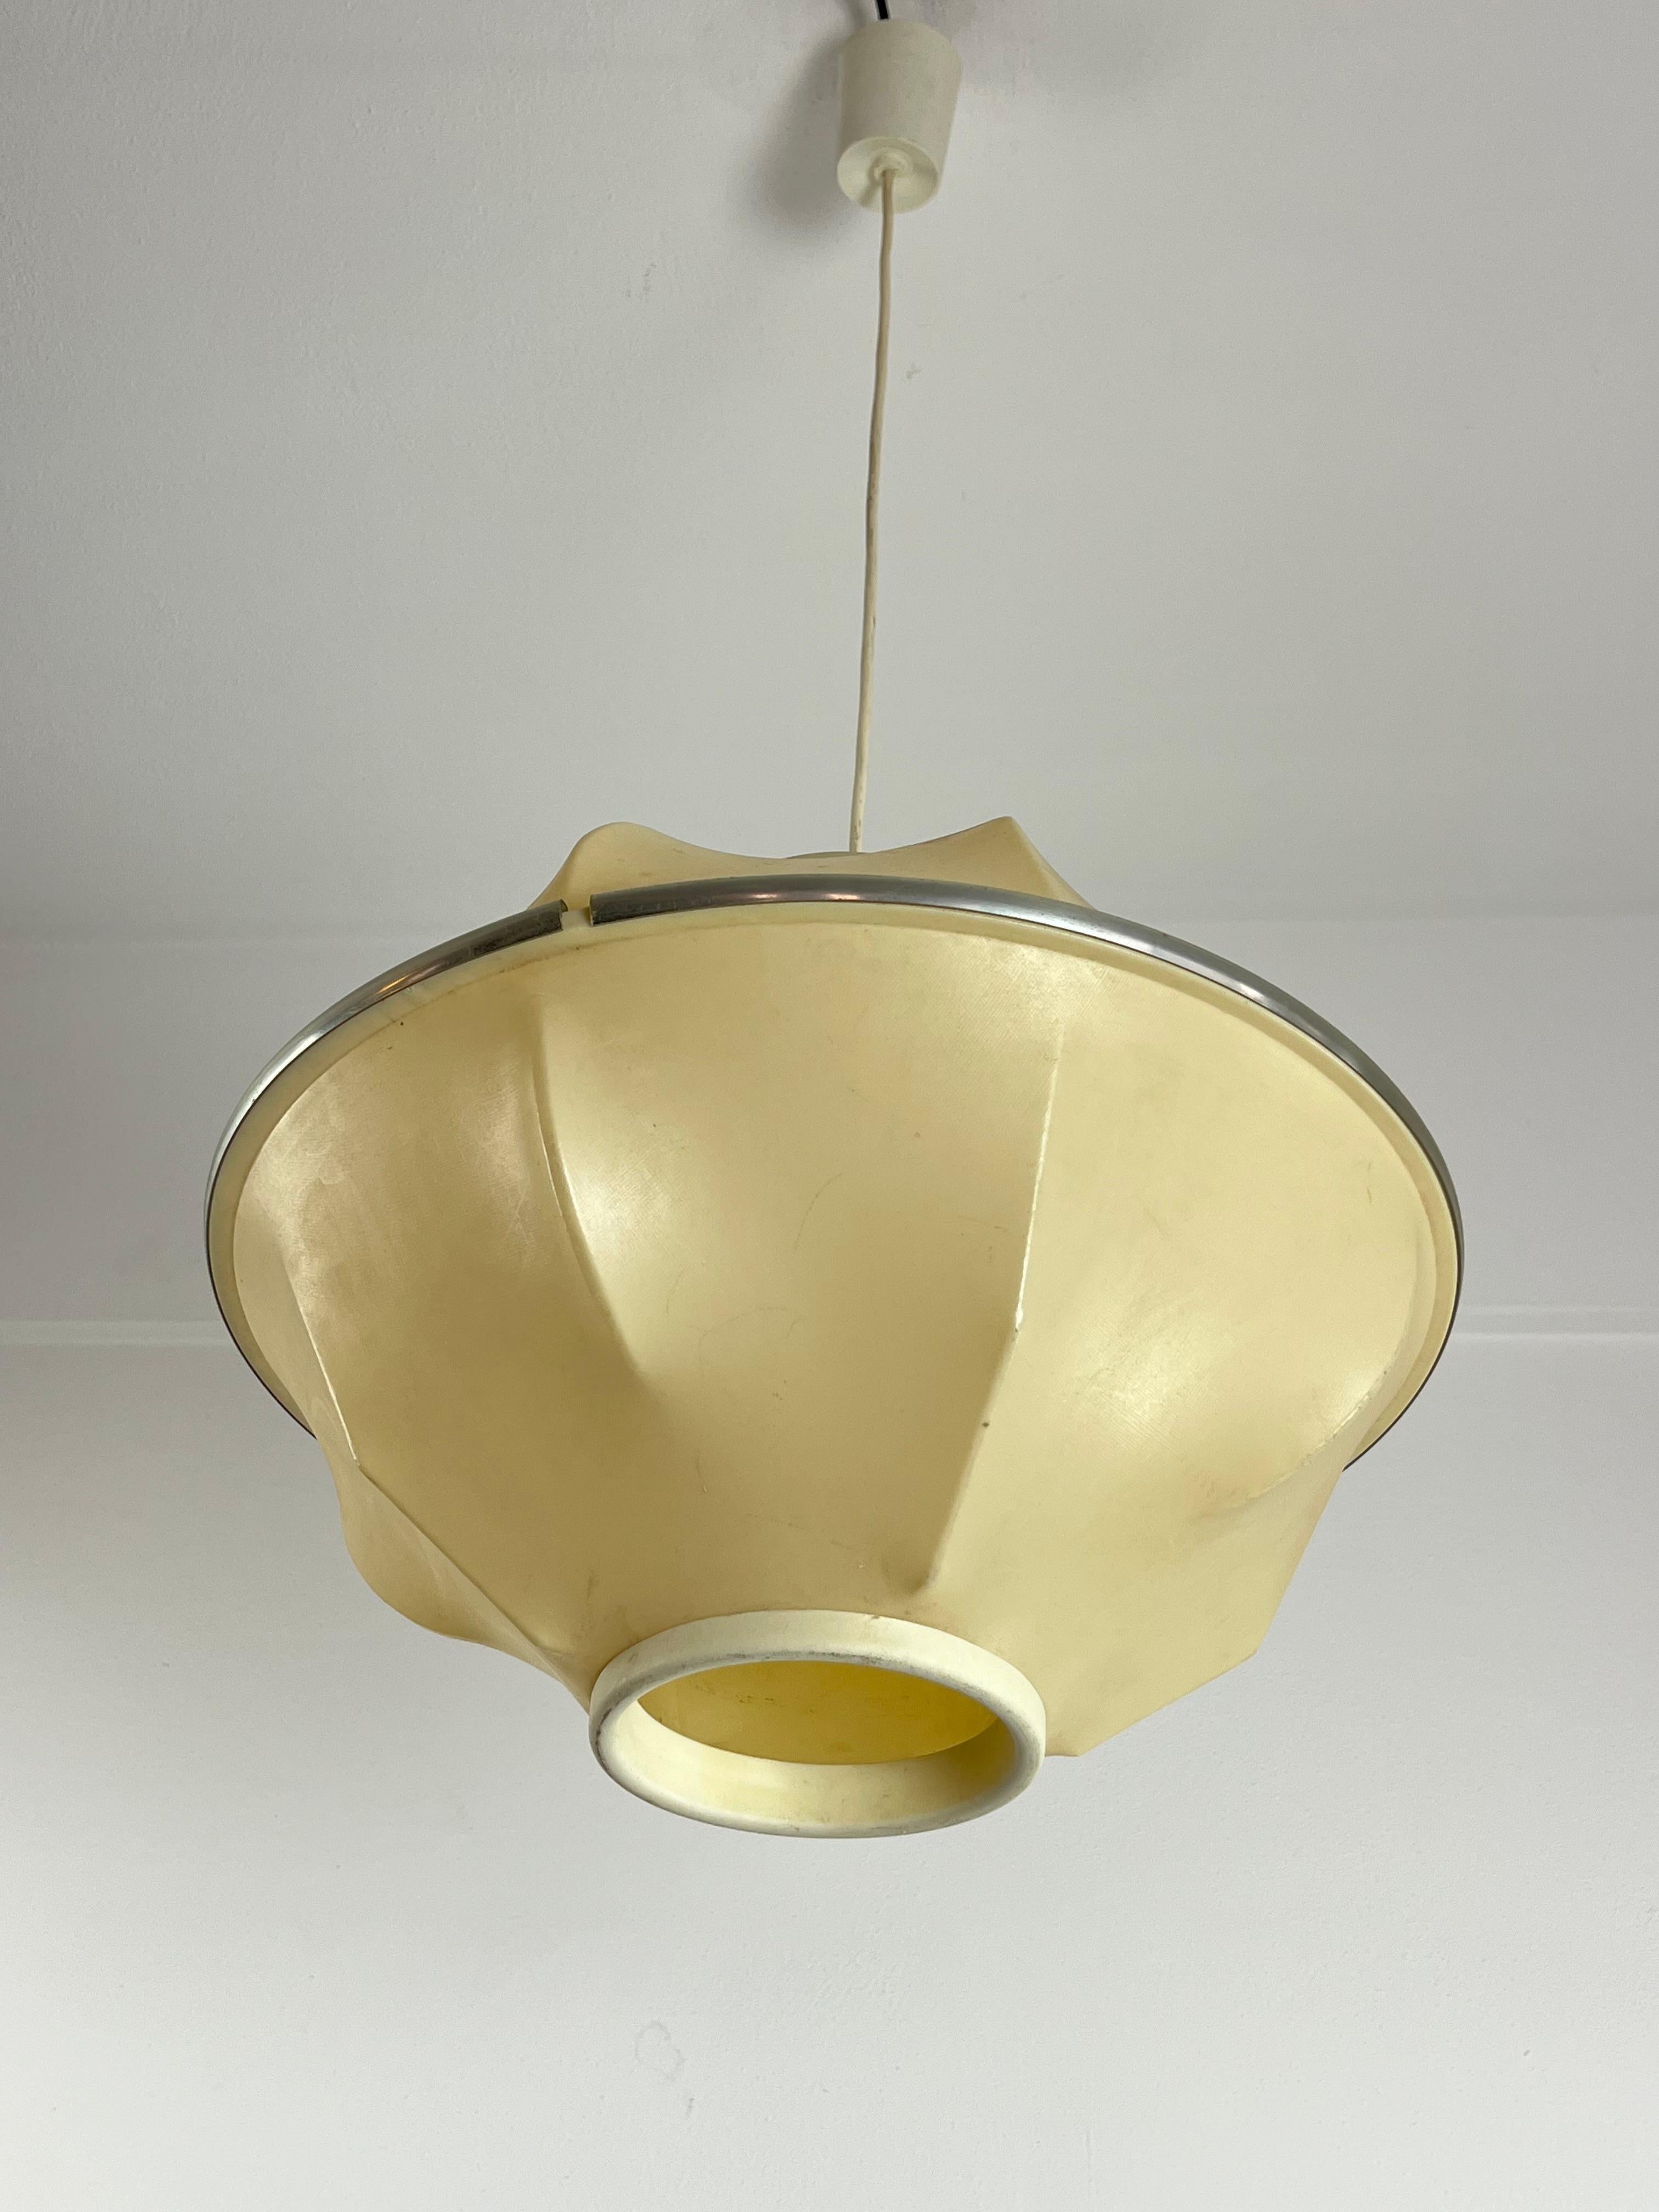 Italian Mid-Century Modern Pendant Lamp Designed & Manufactered Probably By Flos 1960s For Sale